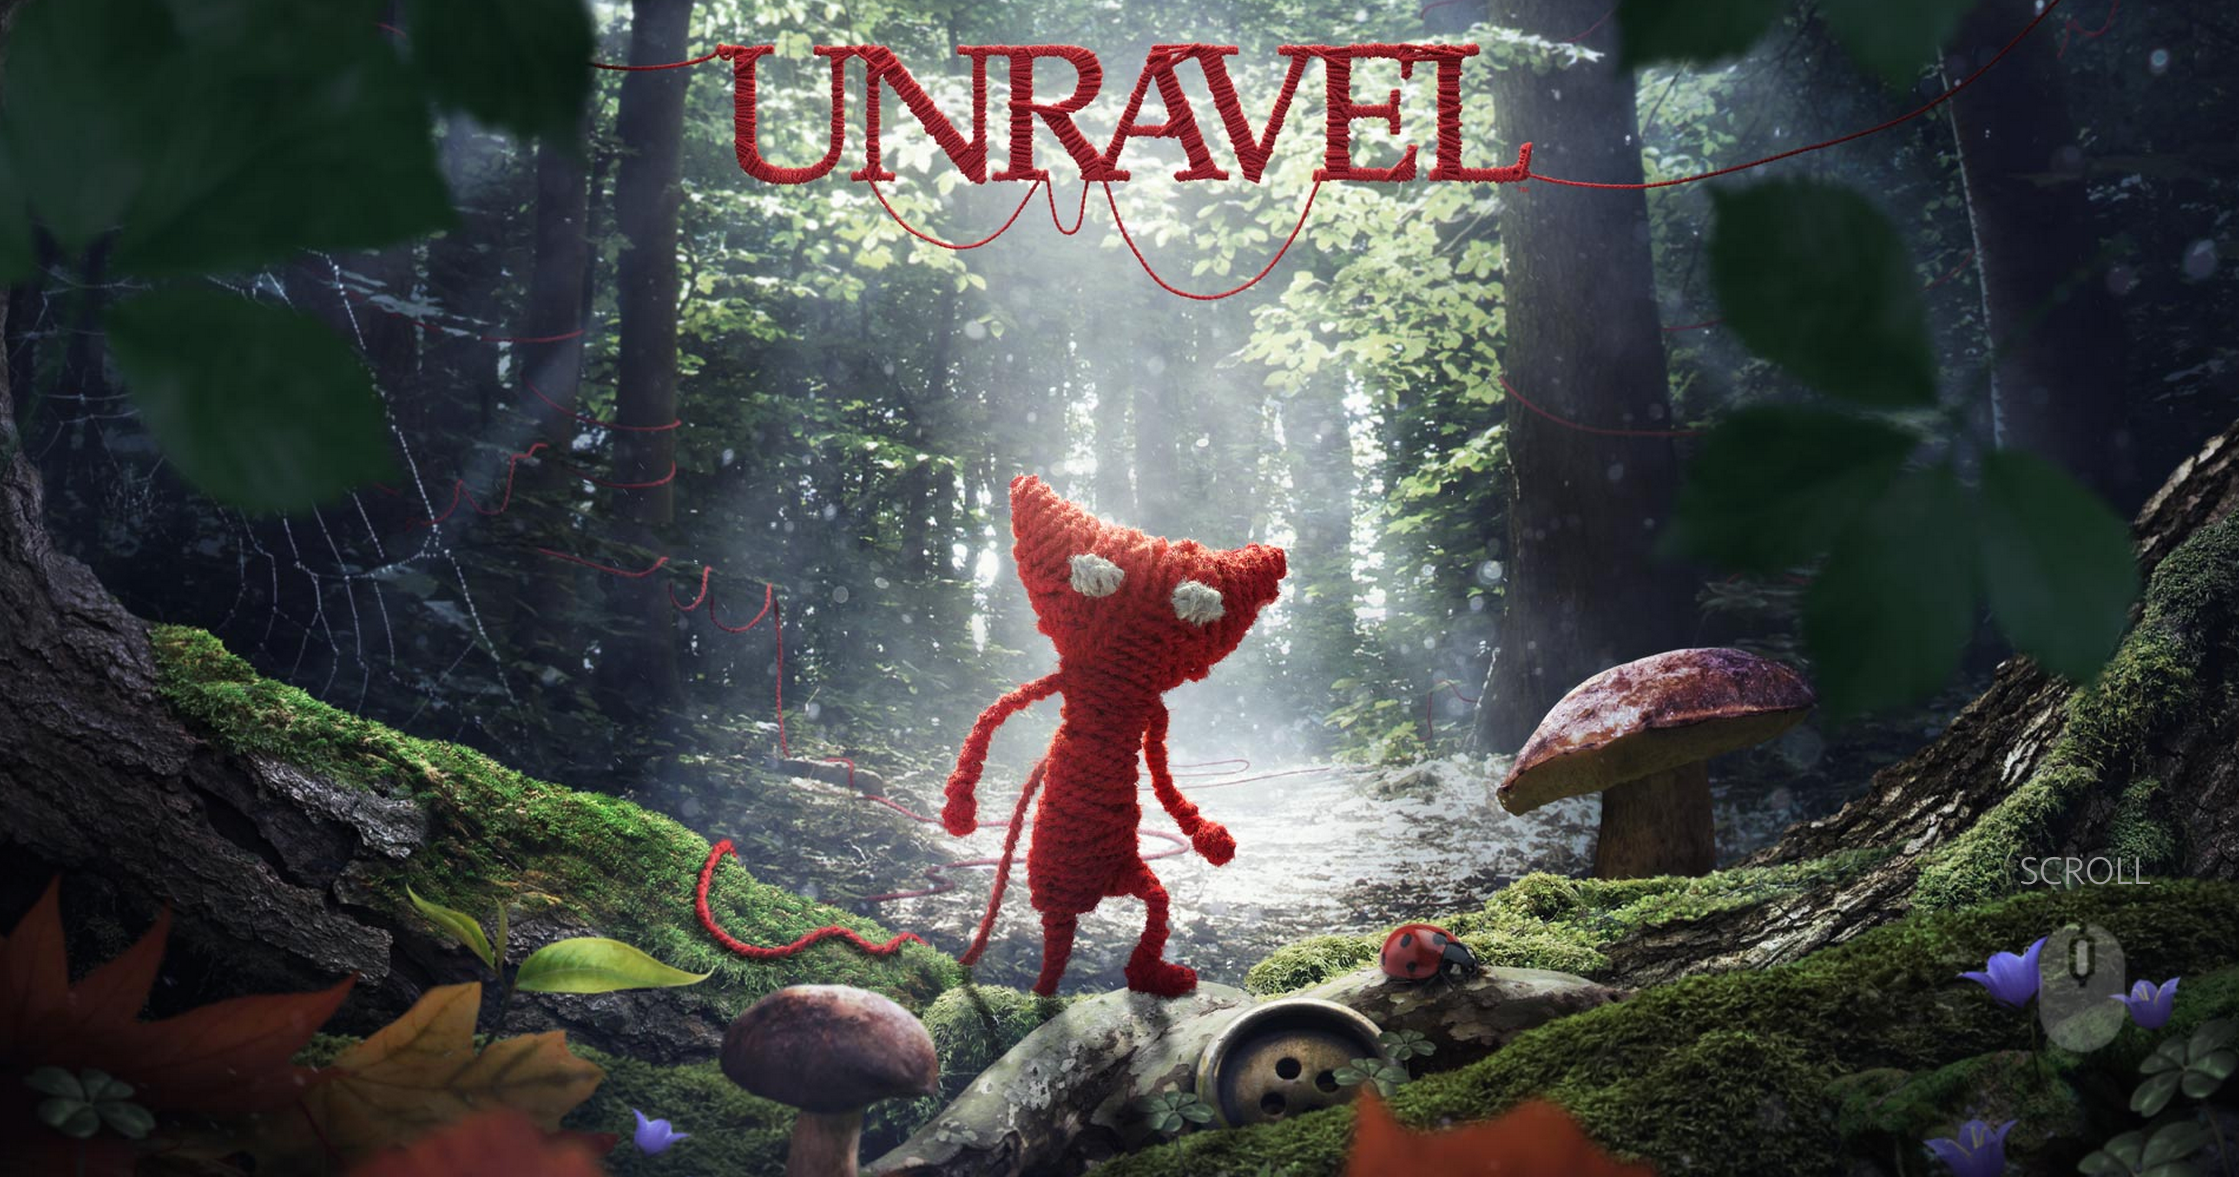 Please Watch This New Unravel Video. It’s So Cute.